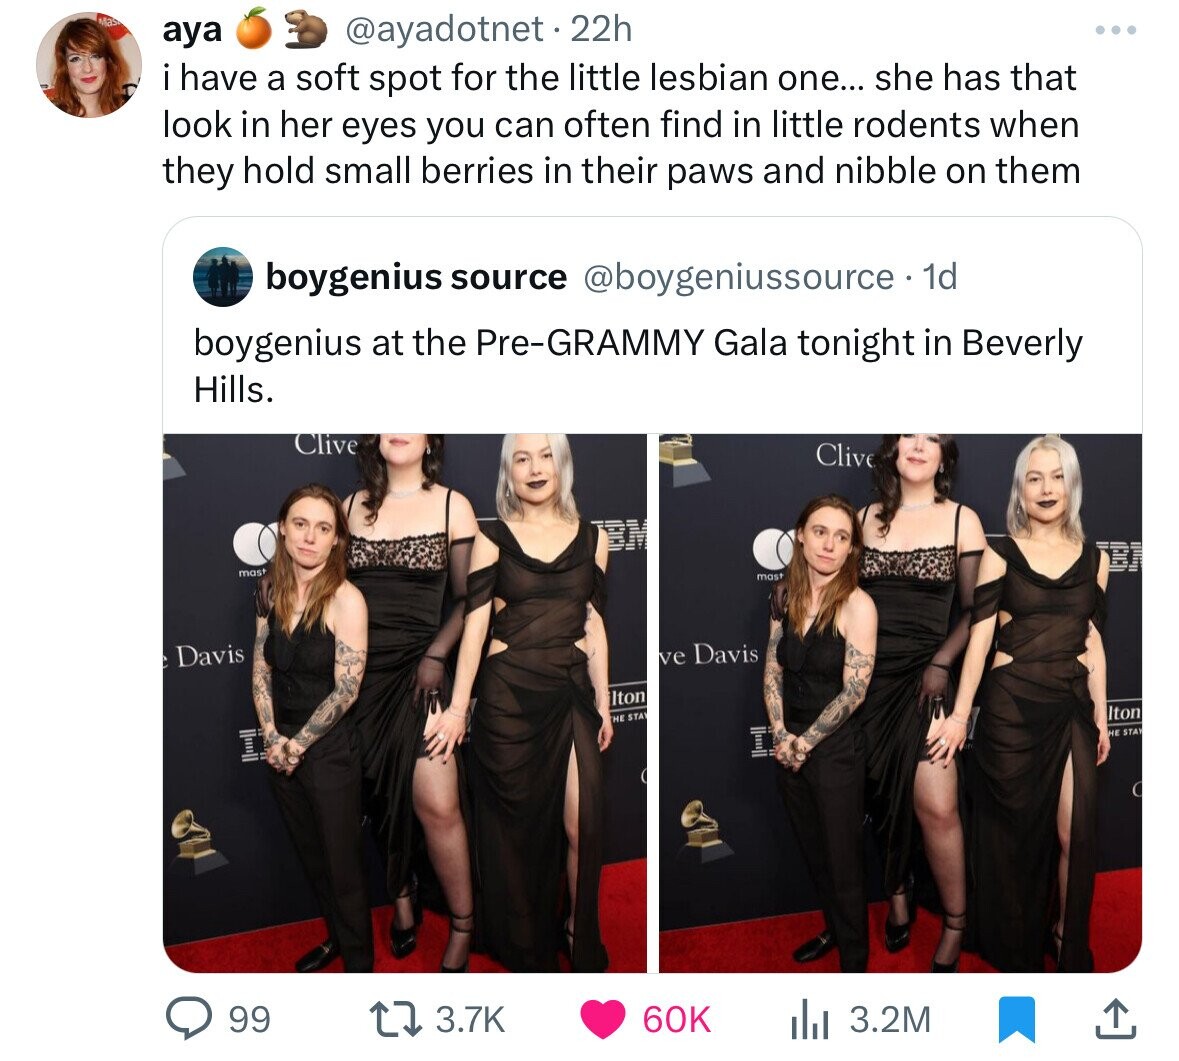 shoulder - aya 22h i have a soft spot for the little lesbian one... she has that look in her eyes you can often find in little rodents when they hold small berries in their paws and nibble on them boygenius source 1d boygenius at the PreGrammy Gala tonigh